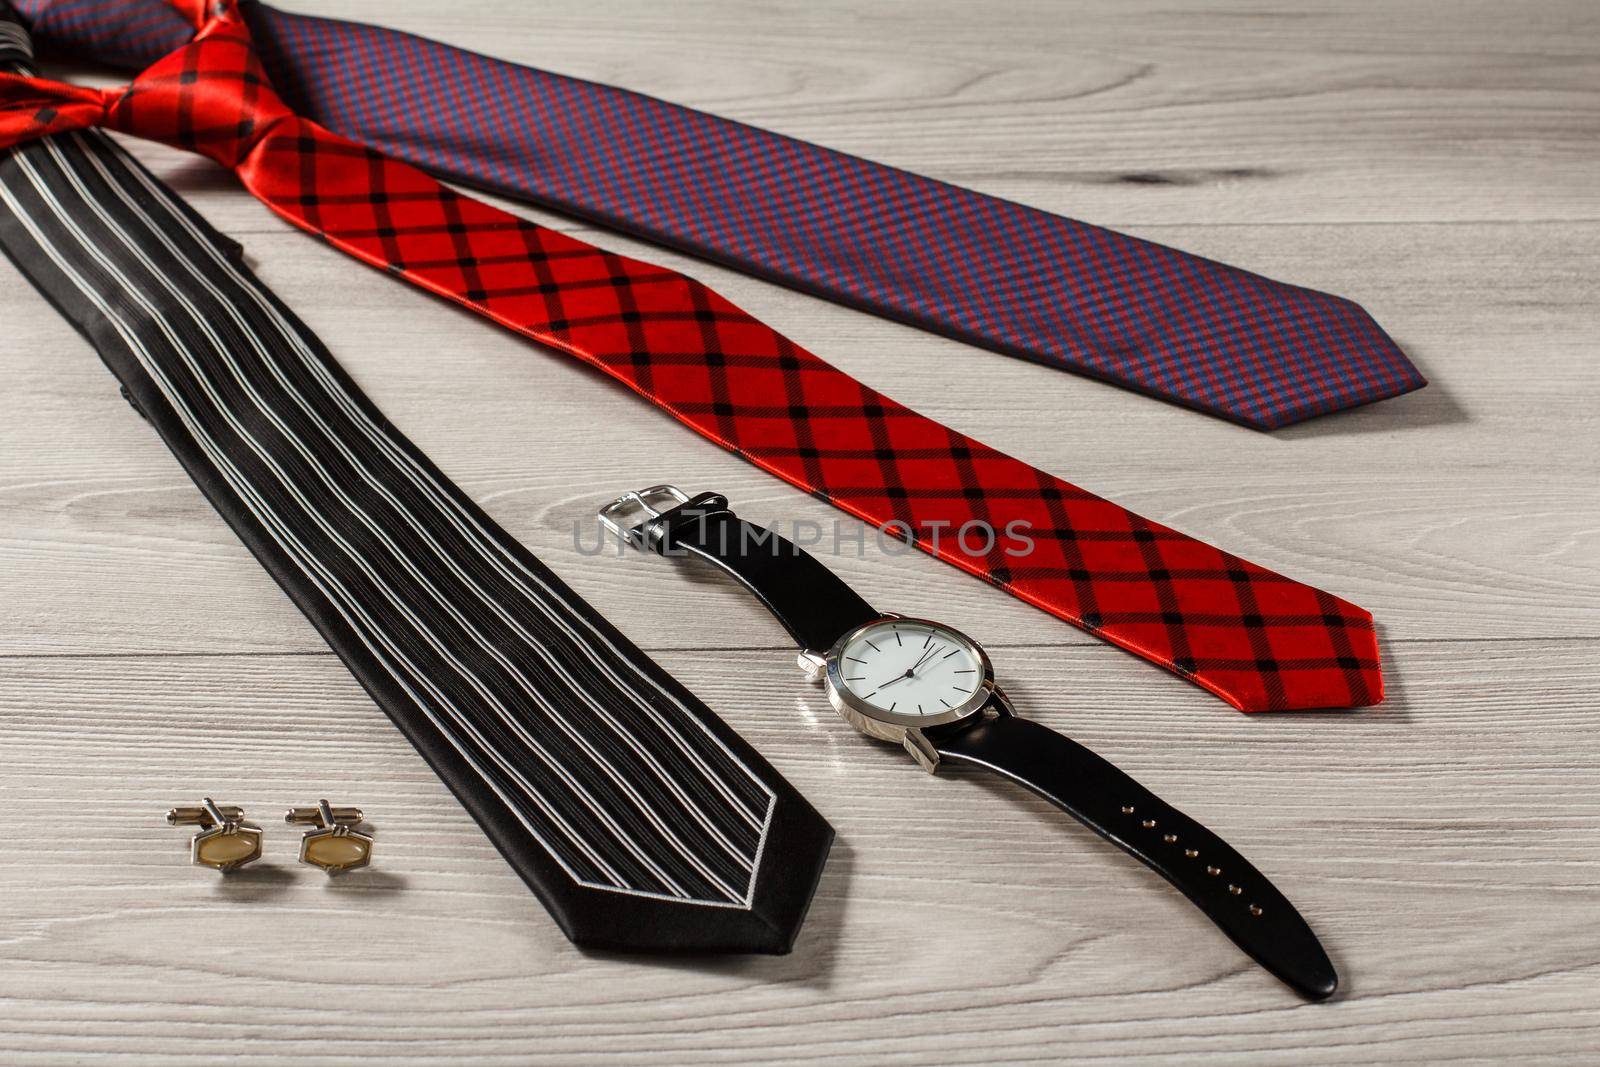 Color silk neckties, watch with a leather strap, cuff-links on a gray wooden background